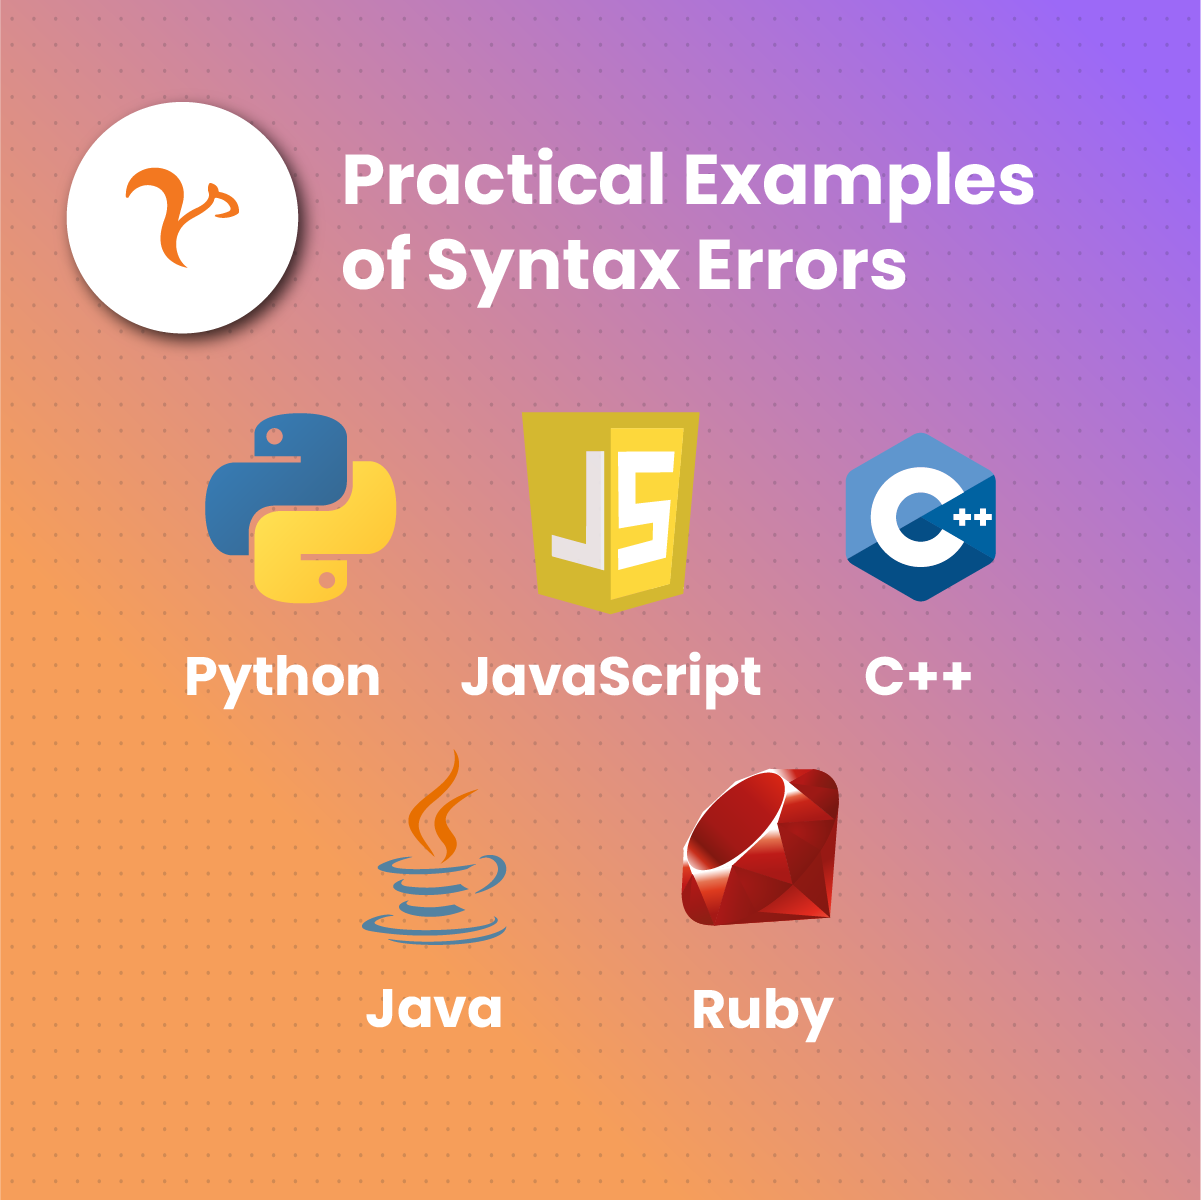 Practical Examples of Syntax Errors